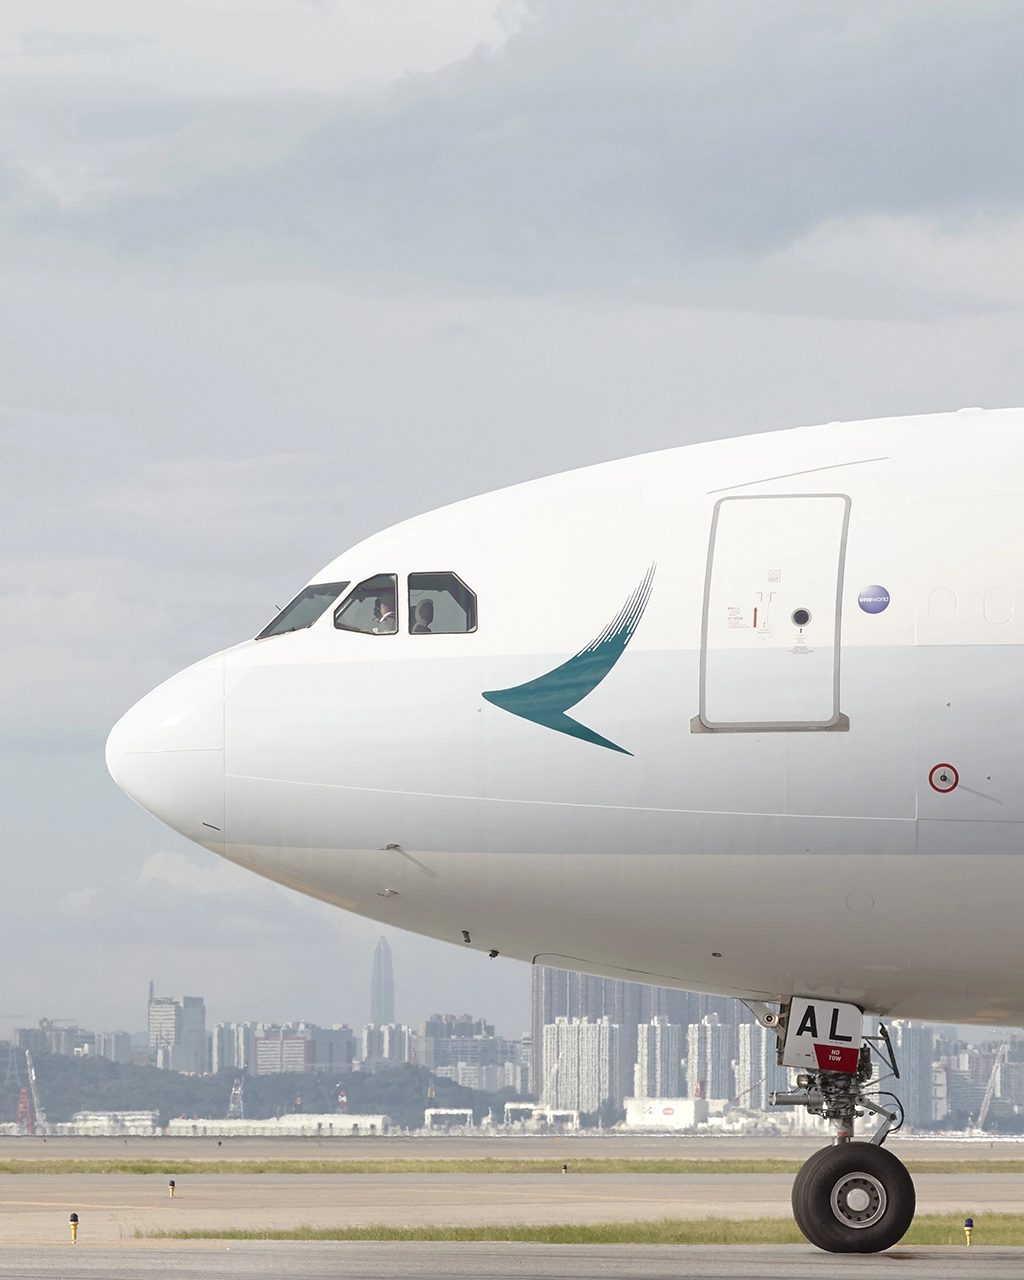 Cathay Cadet Pilot Program – Questions & Answers